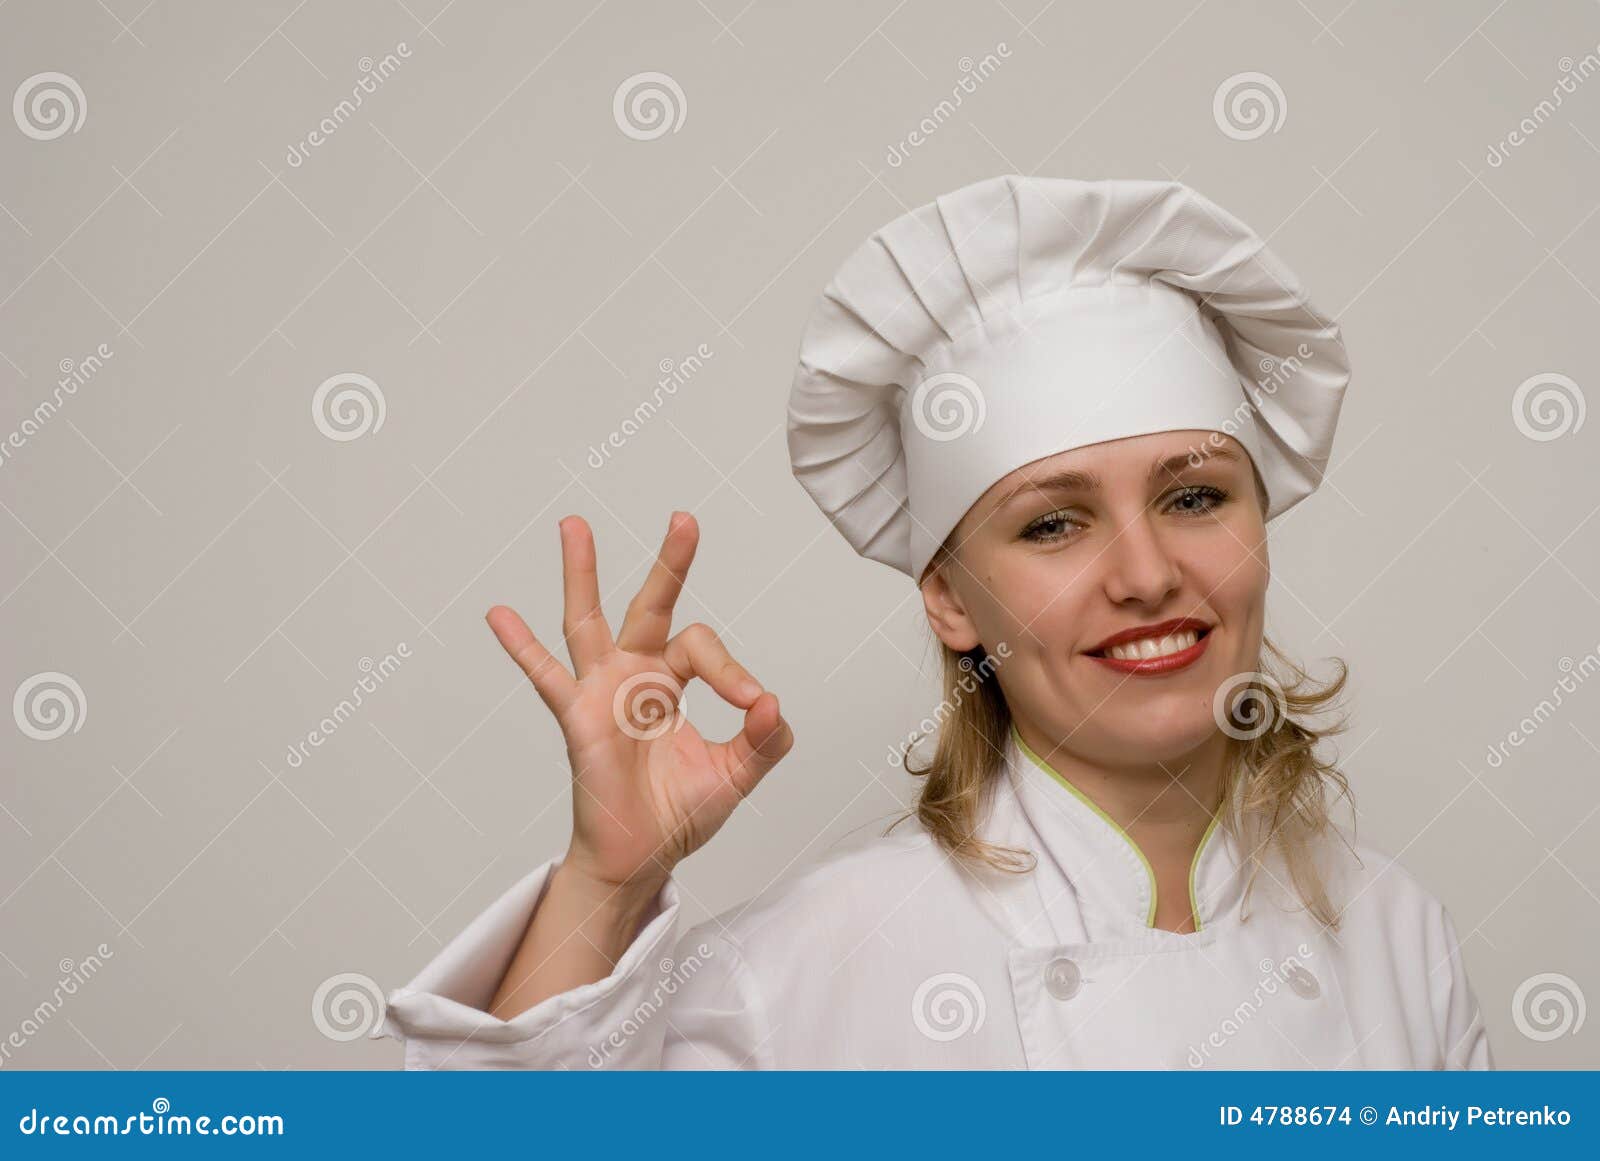 Beautiful Chef Showing On A Light Background Stock Photo - Image of ...